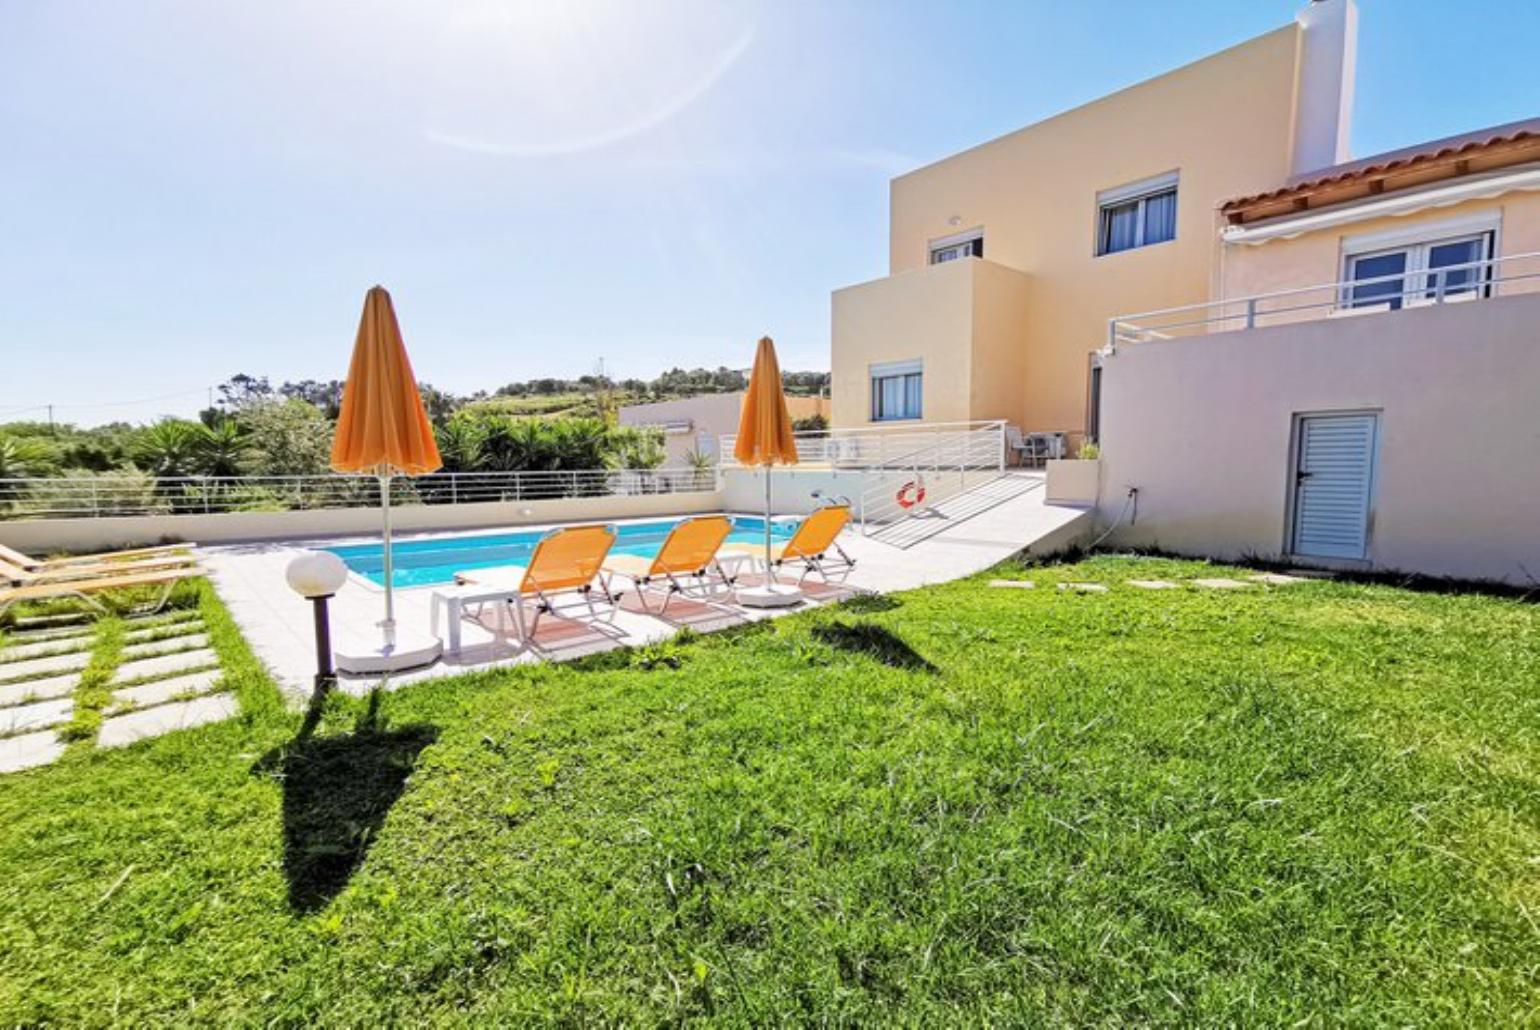 Beautiful villa with private pool, terrace, and lawn